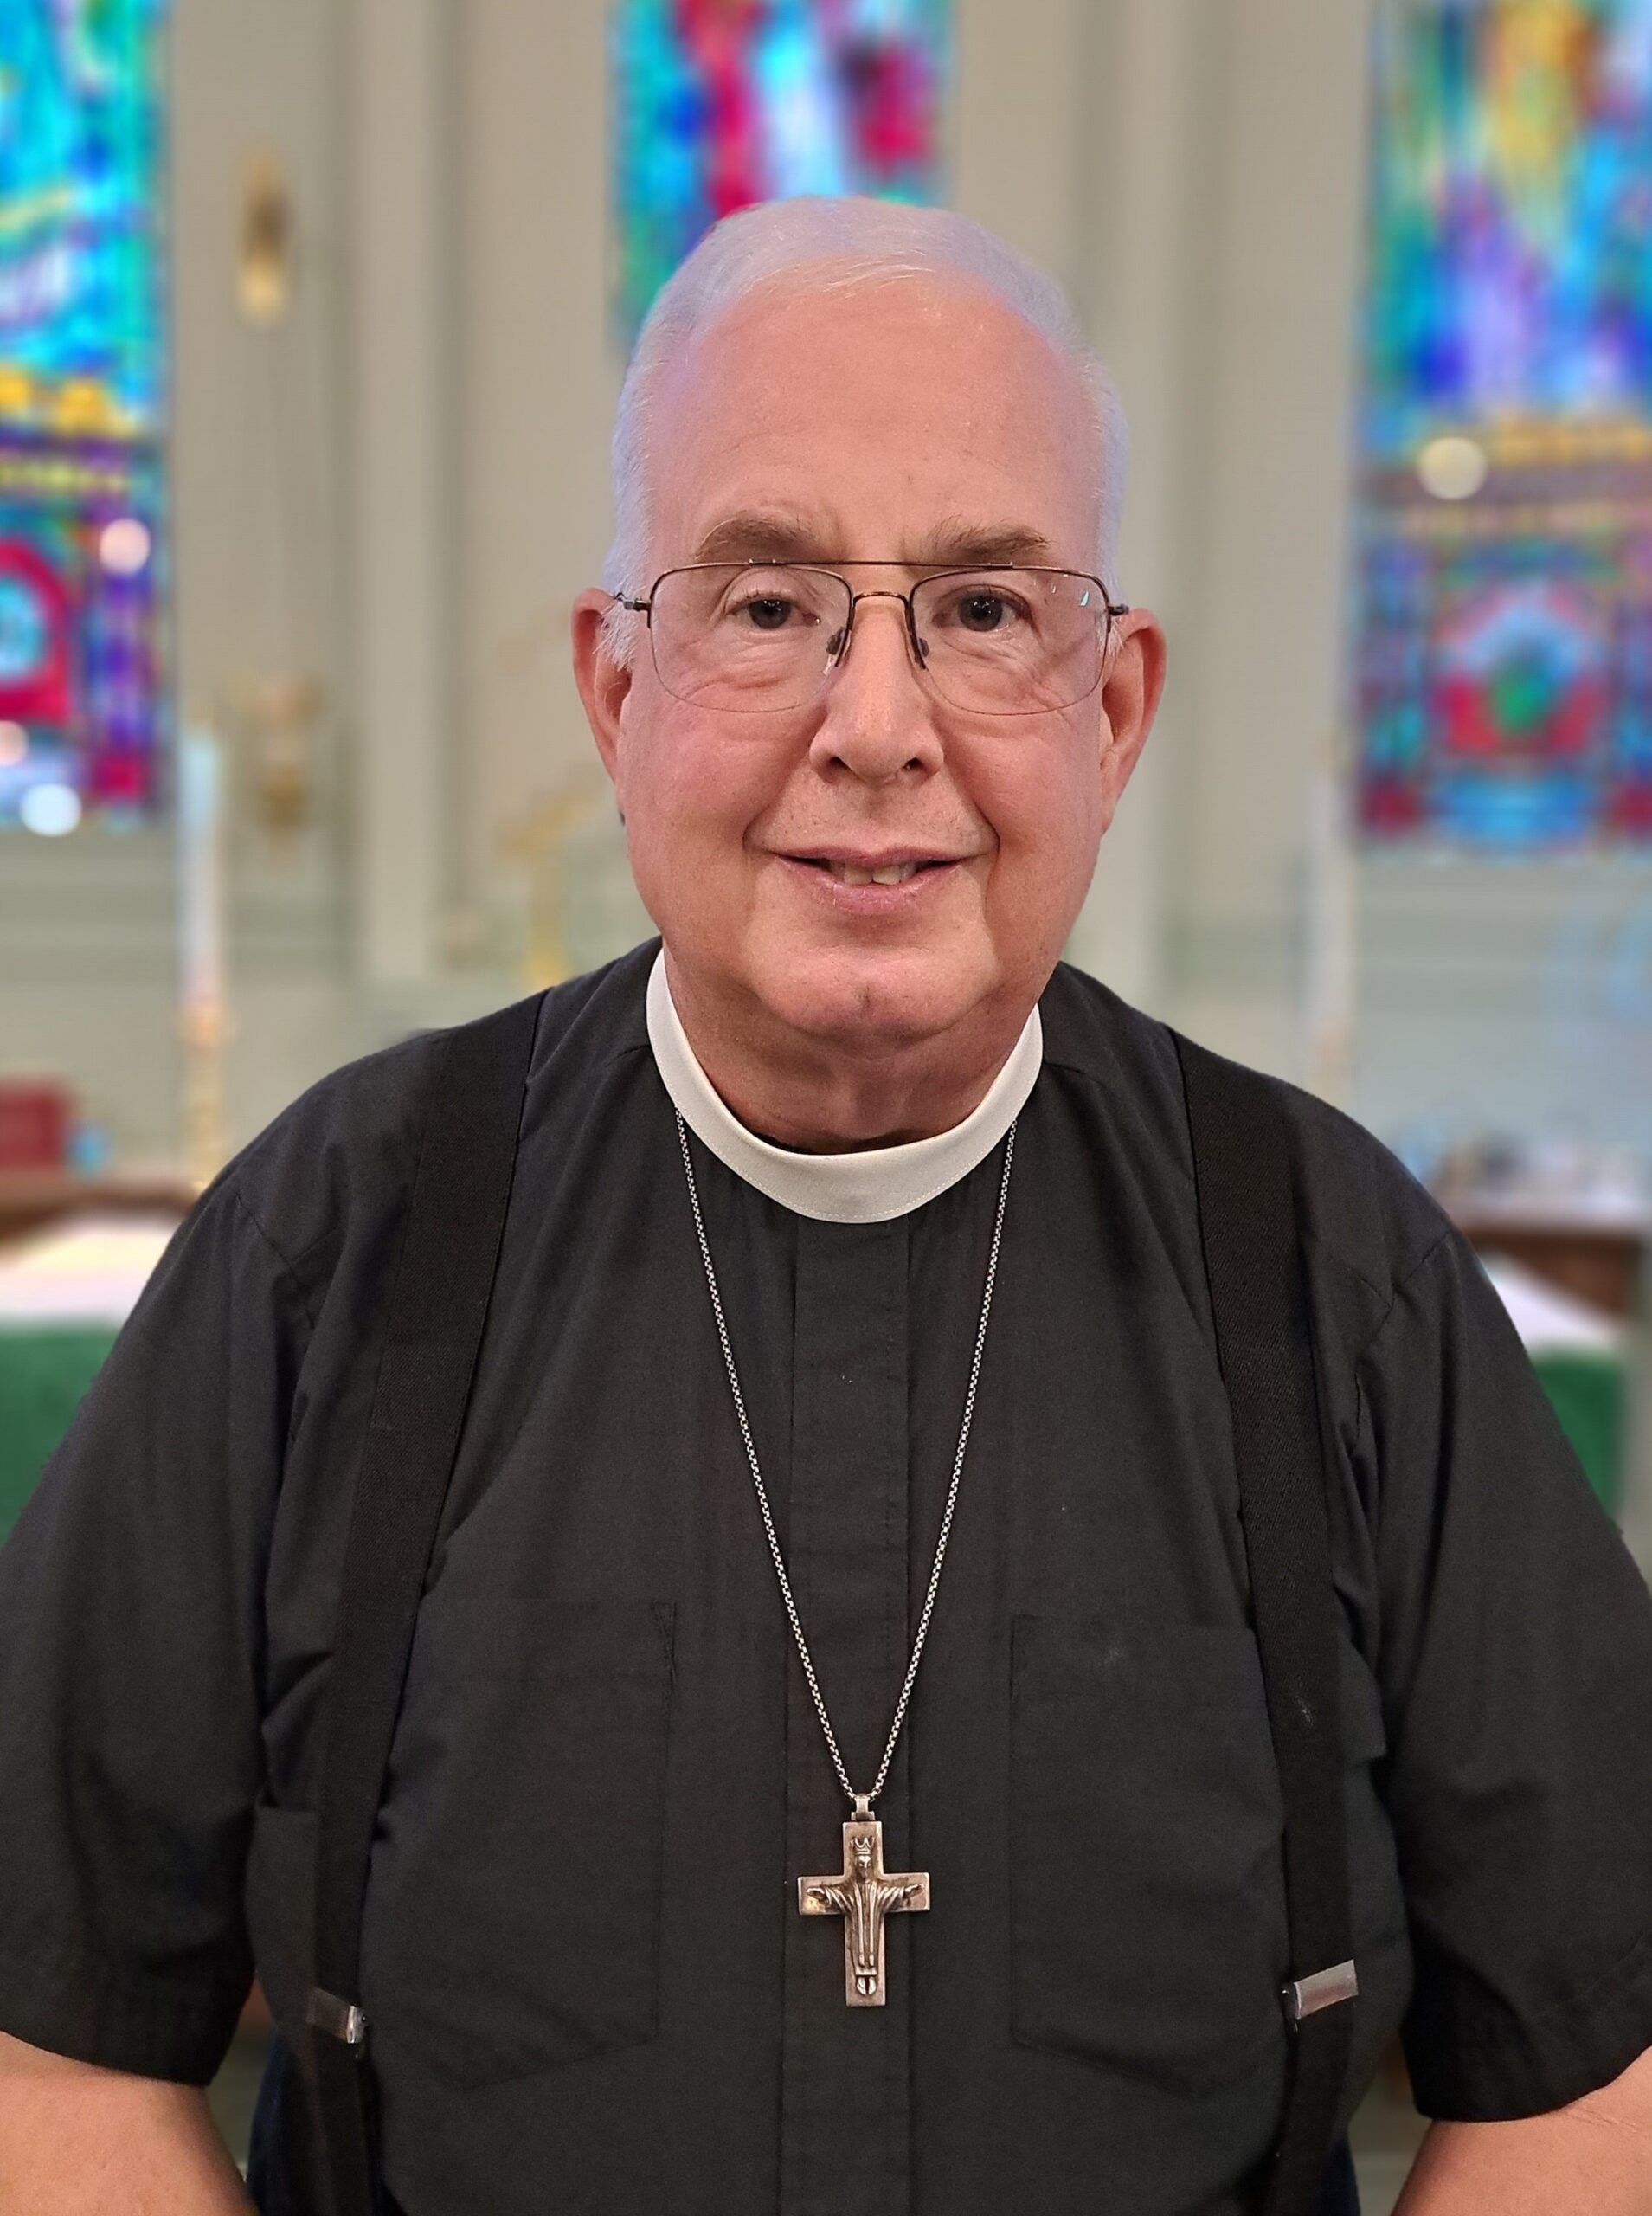 A man wearing a clerical collar, black shirt, and glasses stands in a church with colorful stained glass windows in the background. He has white hair and is smiling. A cross necklace hangs around his neck.